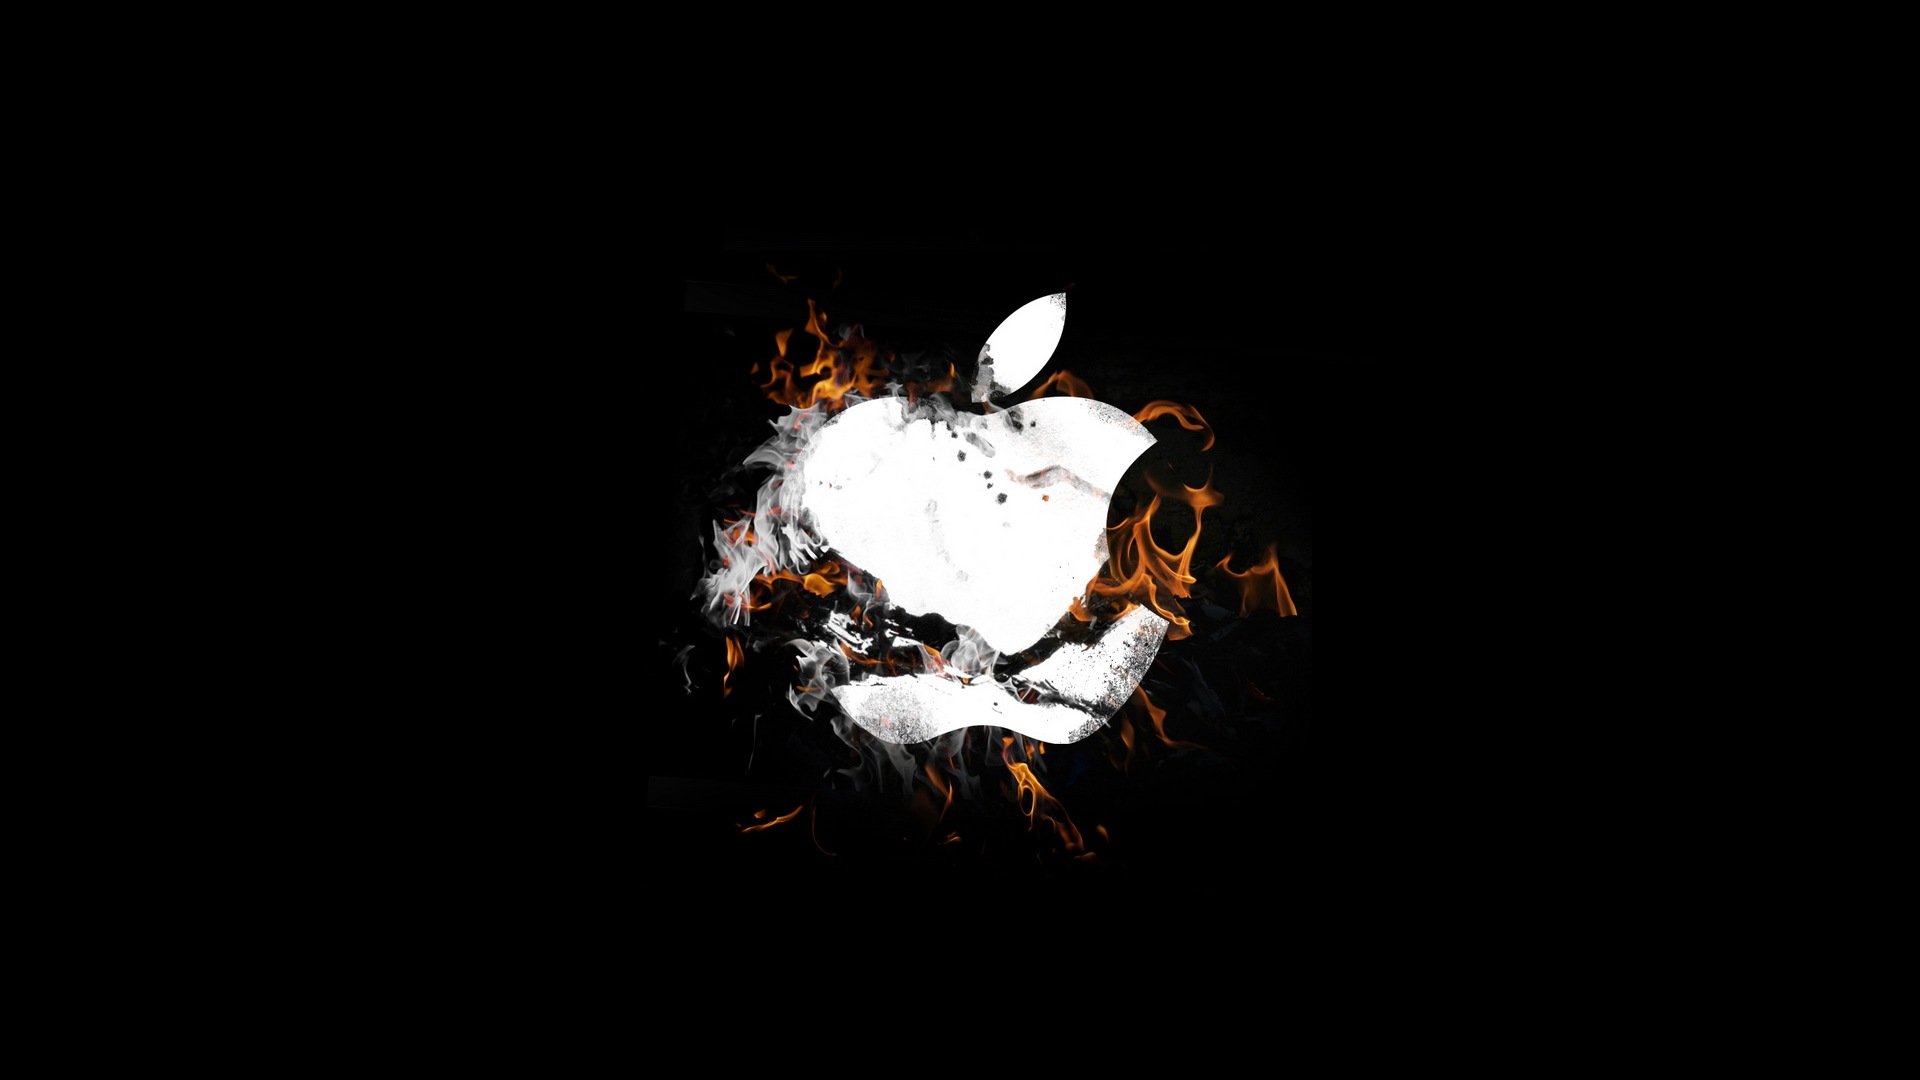 best mac wallpapers hd,smoking cessation,darkness,photography,still life photography,graphic design